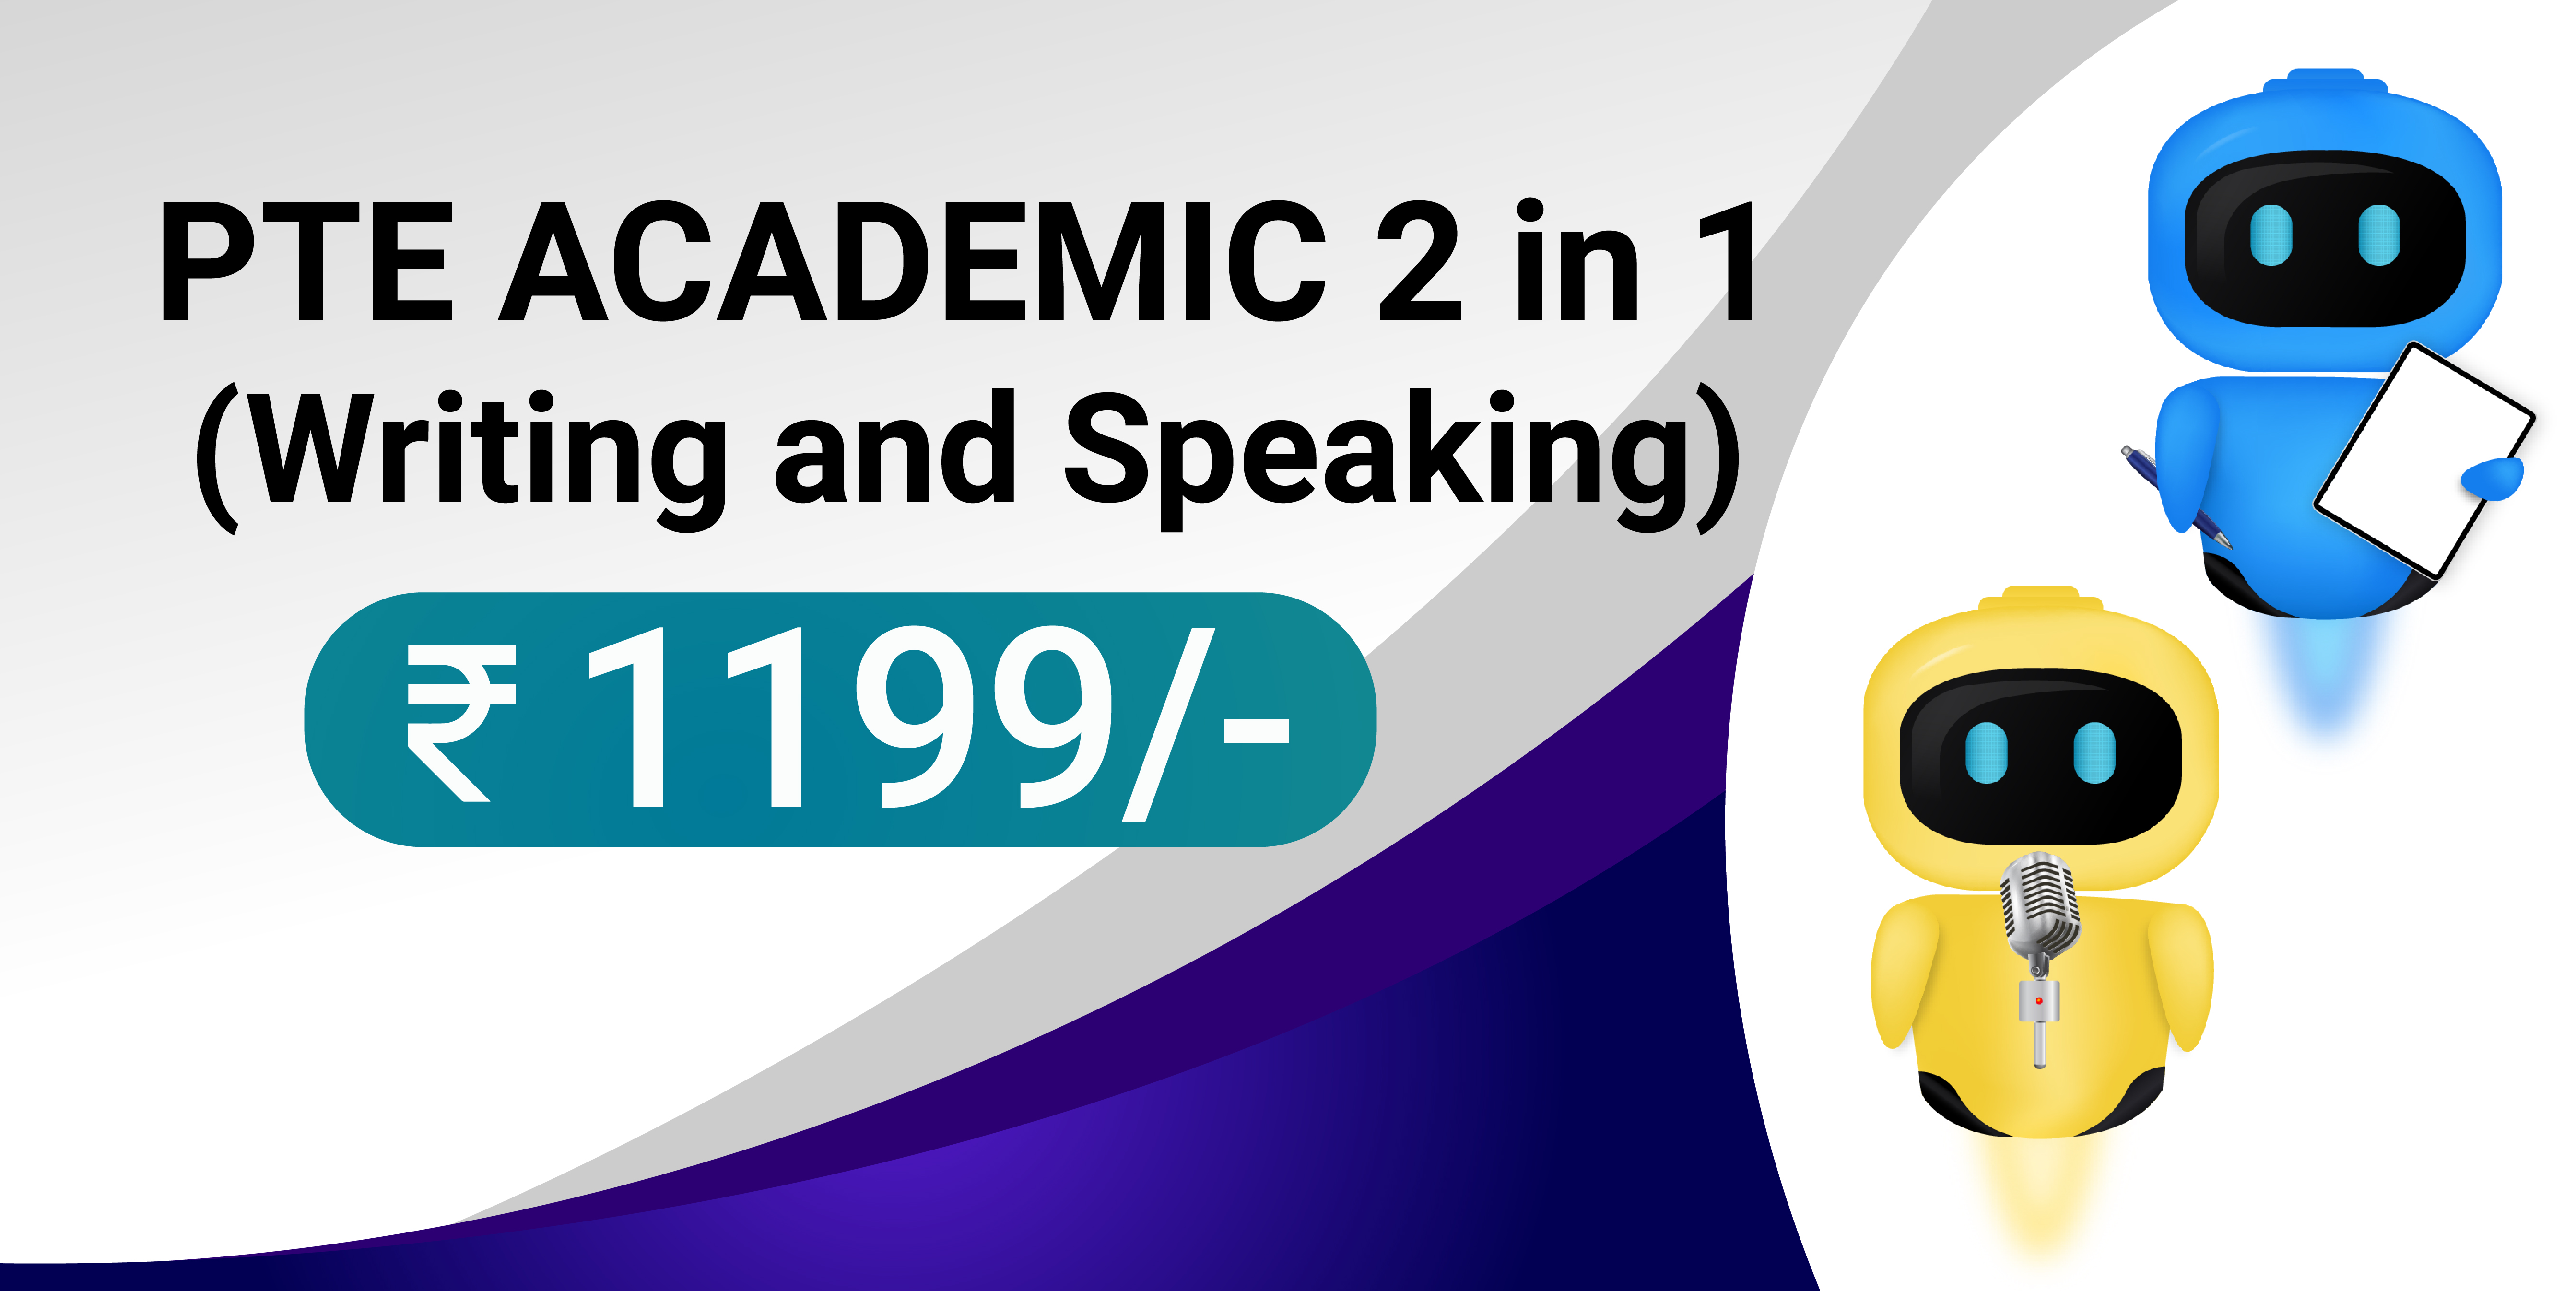 PTE ACADEMIC 2 in 1 (Writing and Speaking)